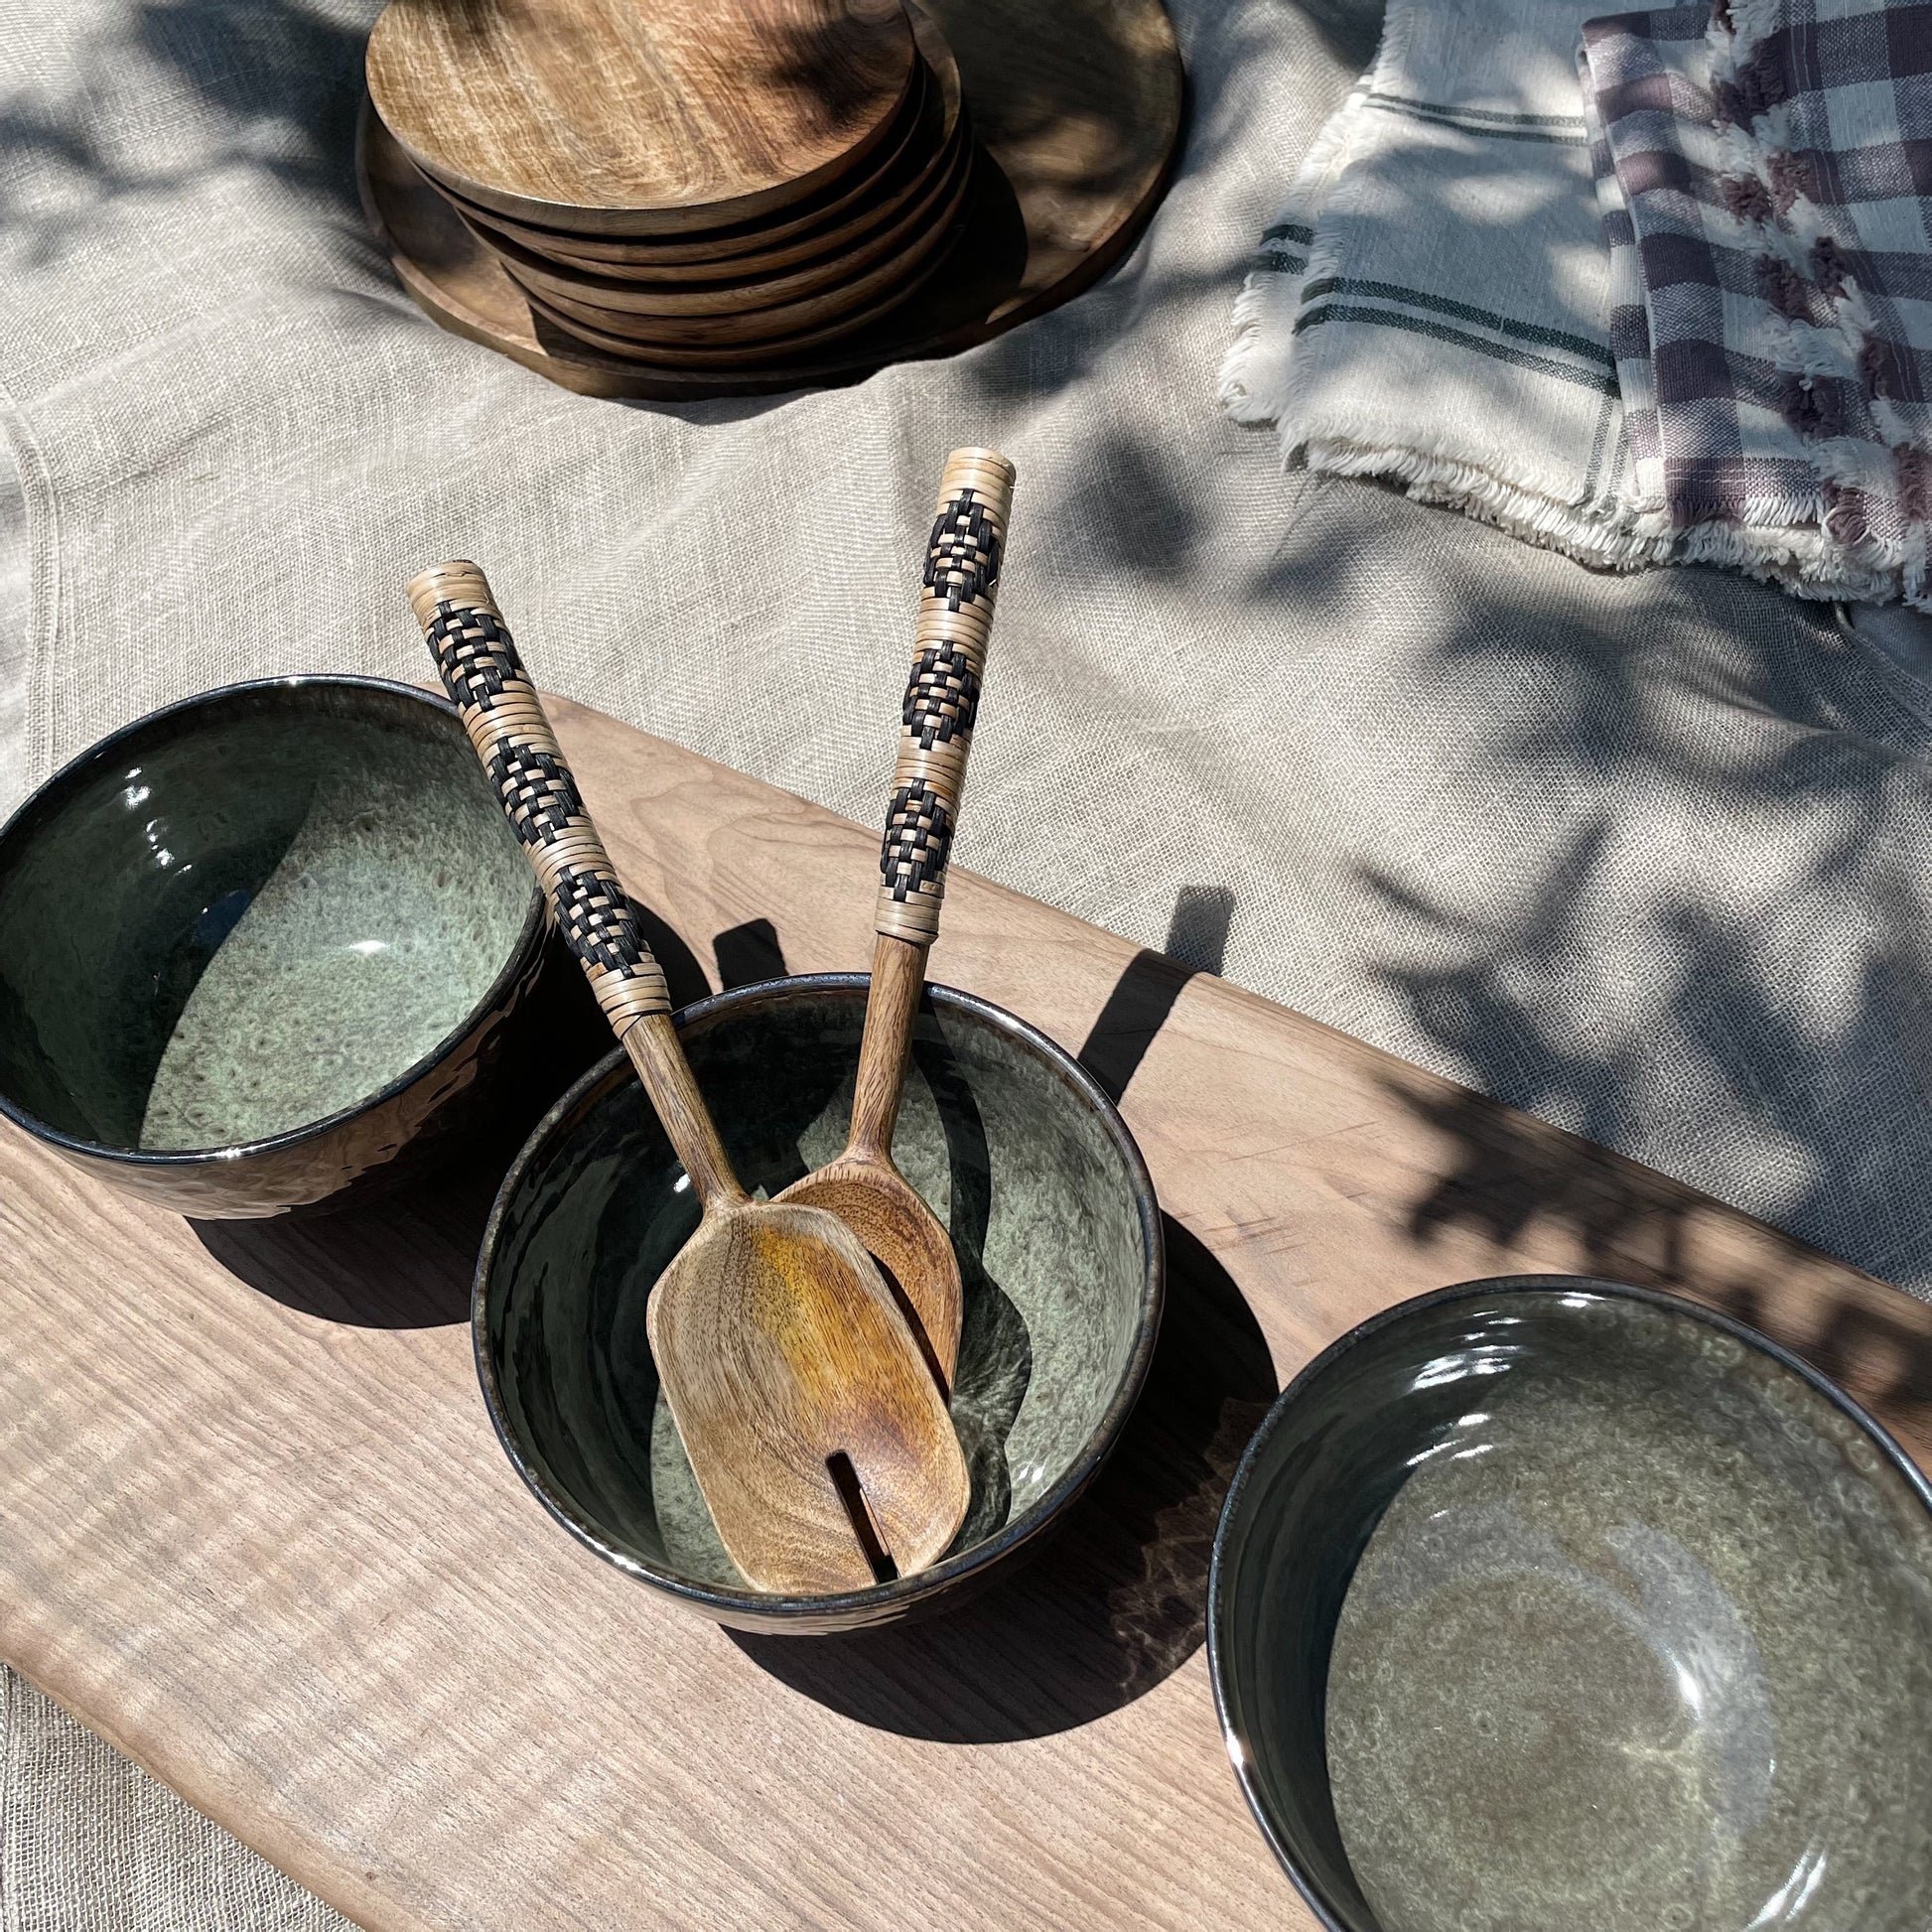 three dark green bowls on a wooden board, with wooden salad servers in the middle bowl